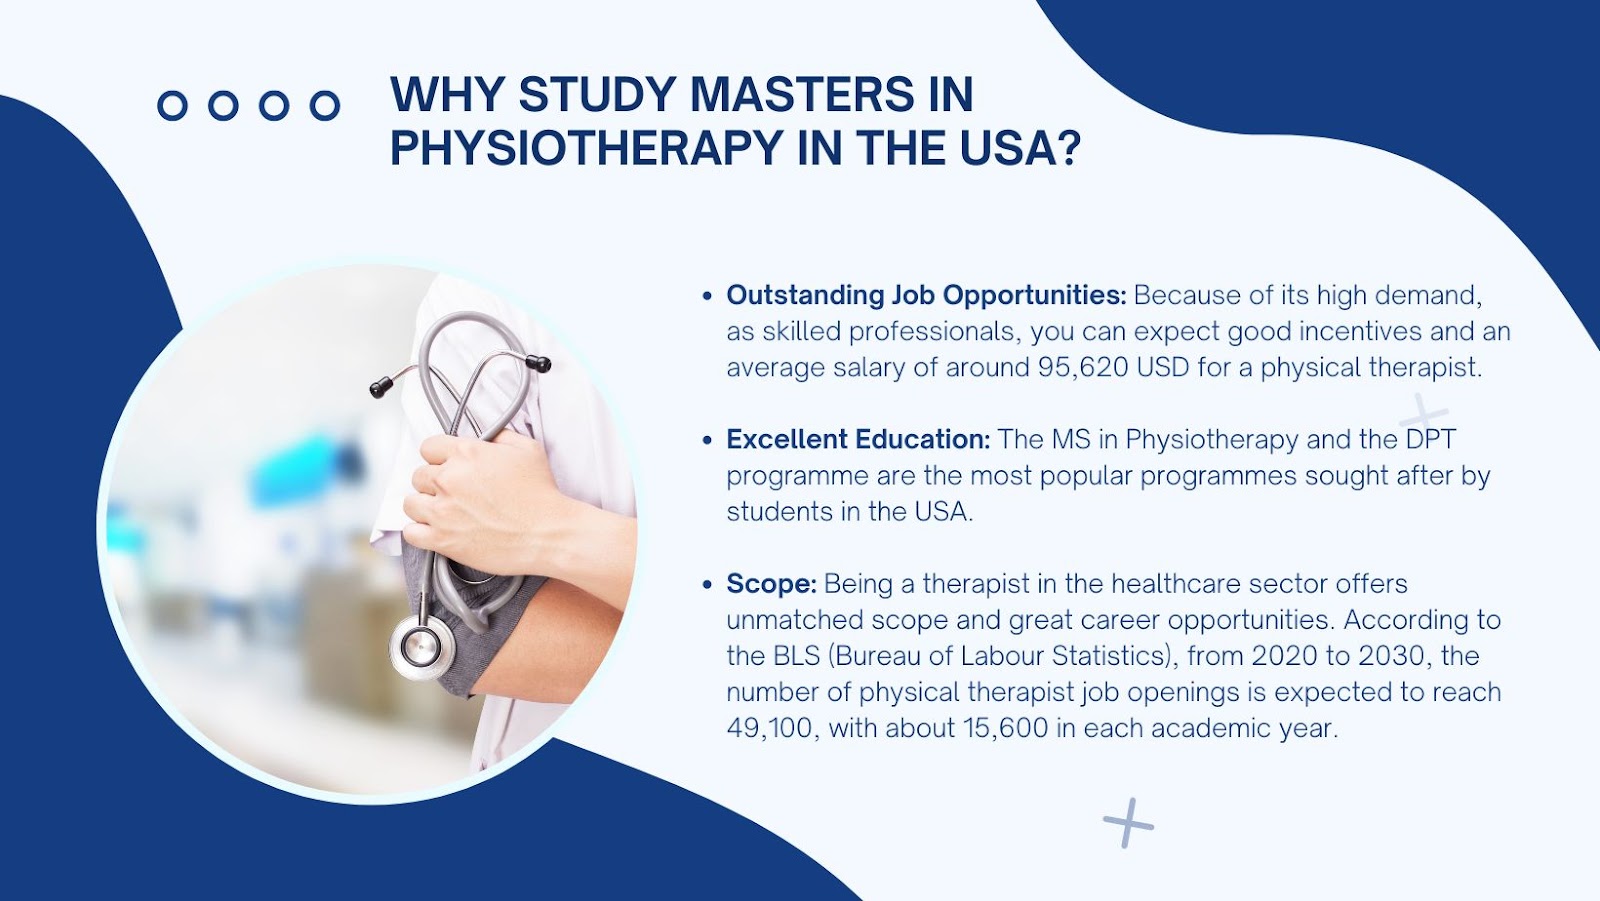 Study Masters In Physiotherapy In The USA